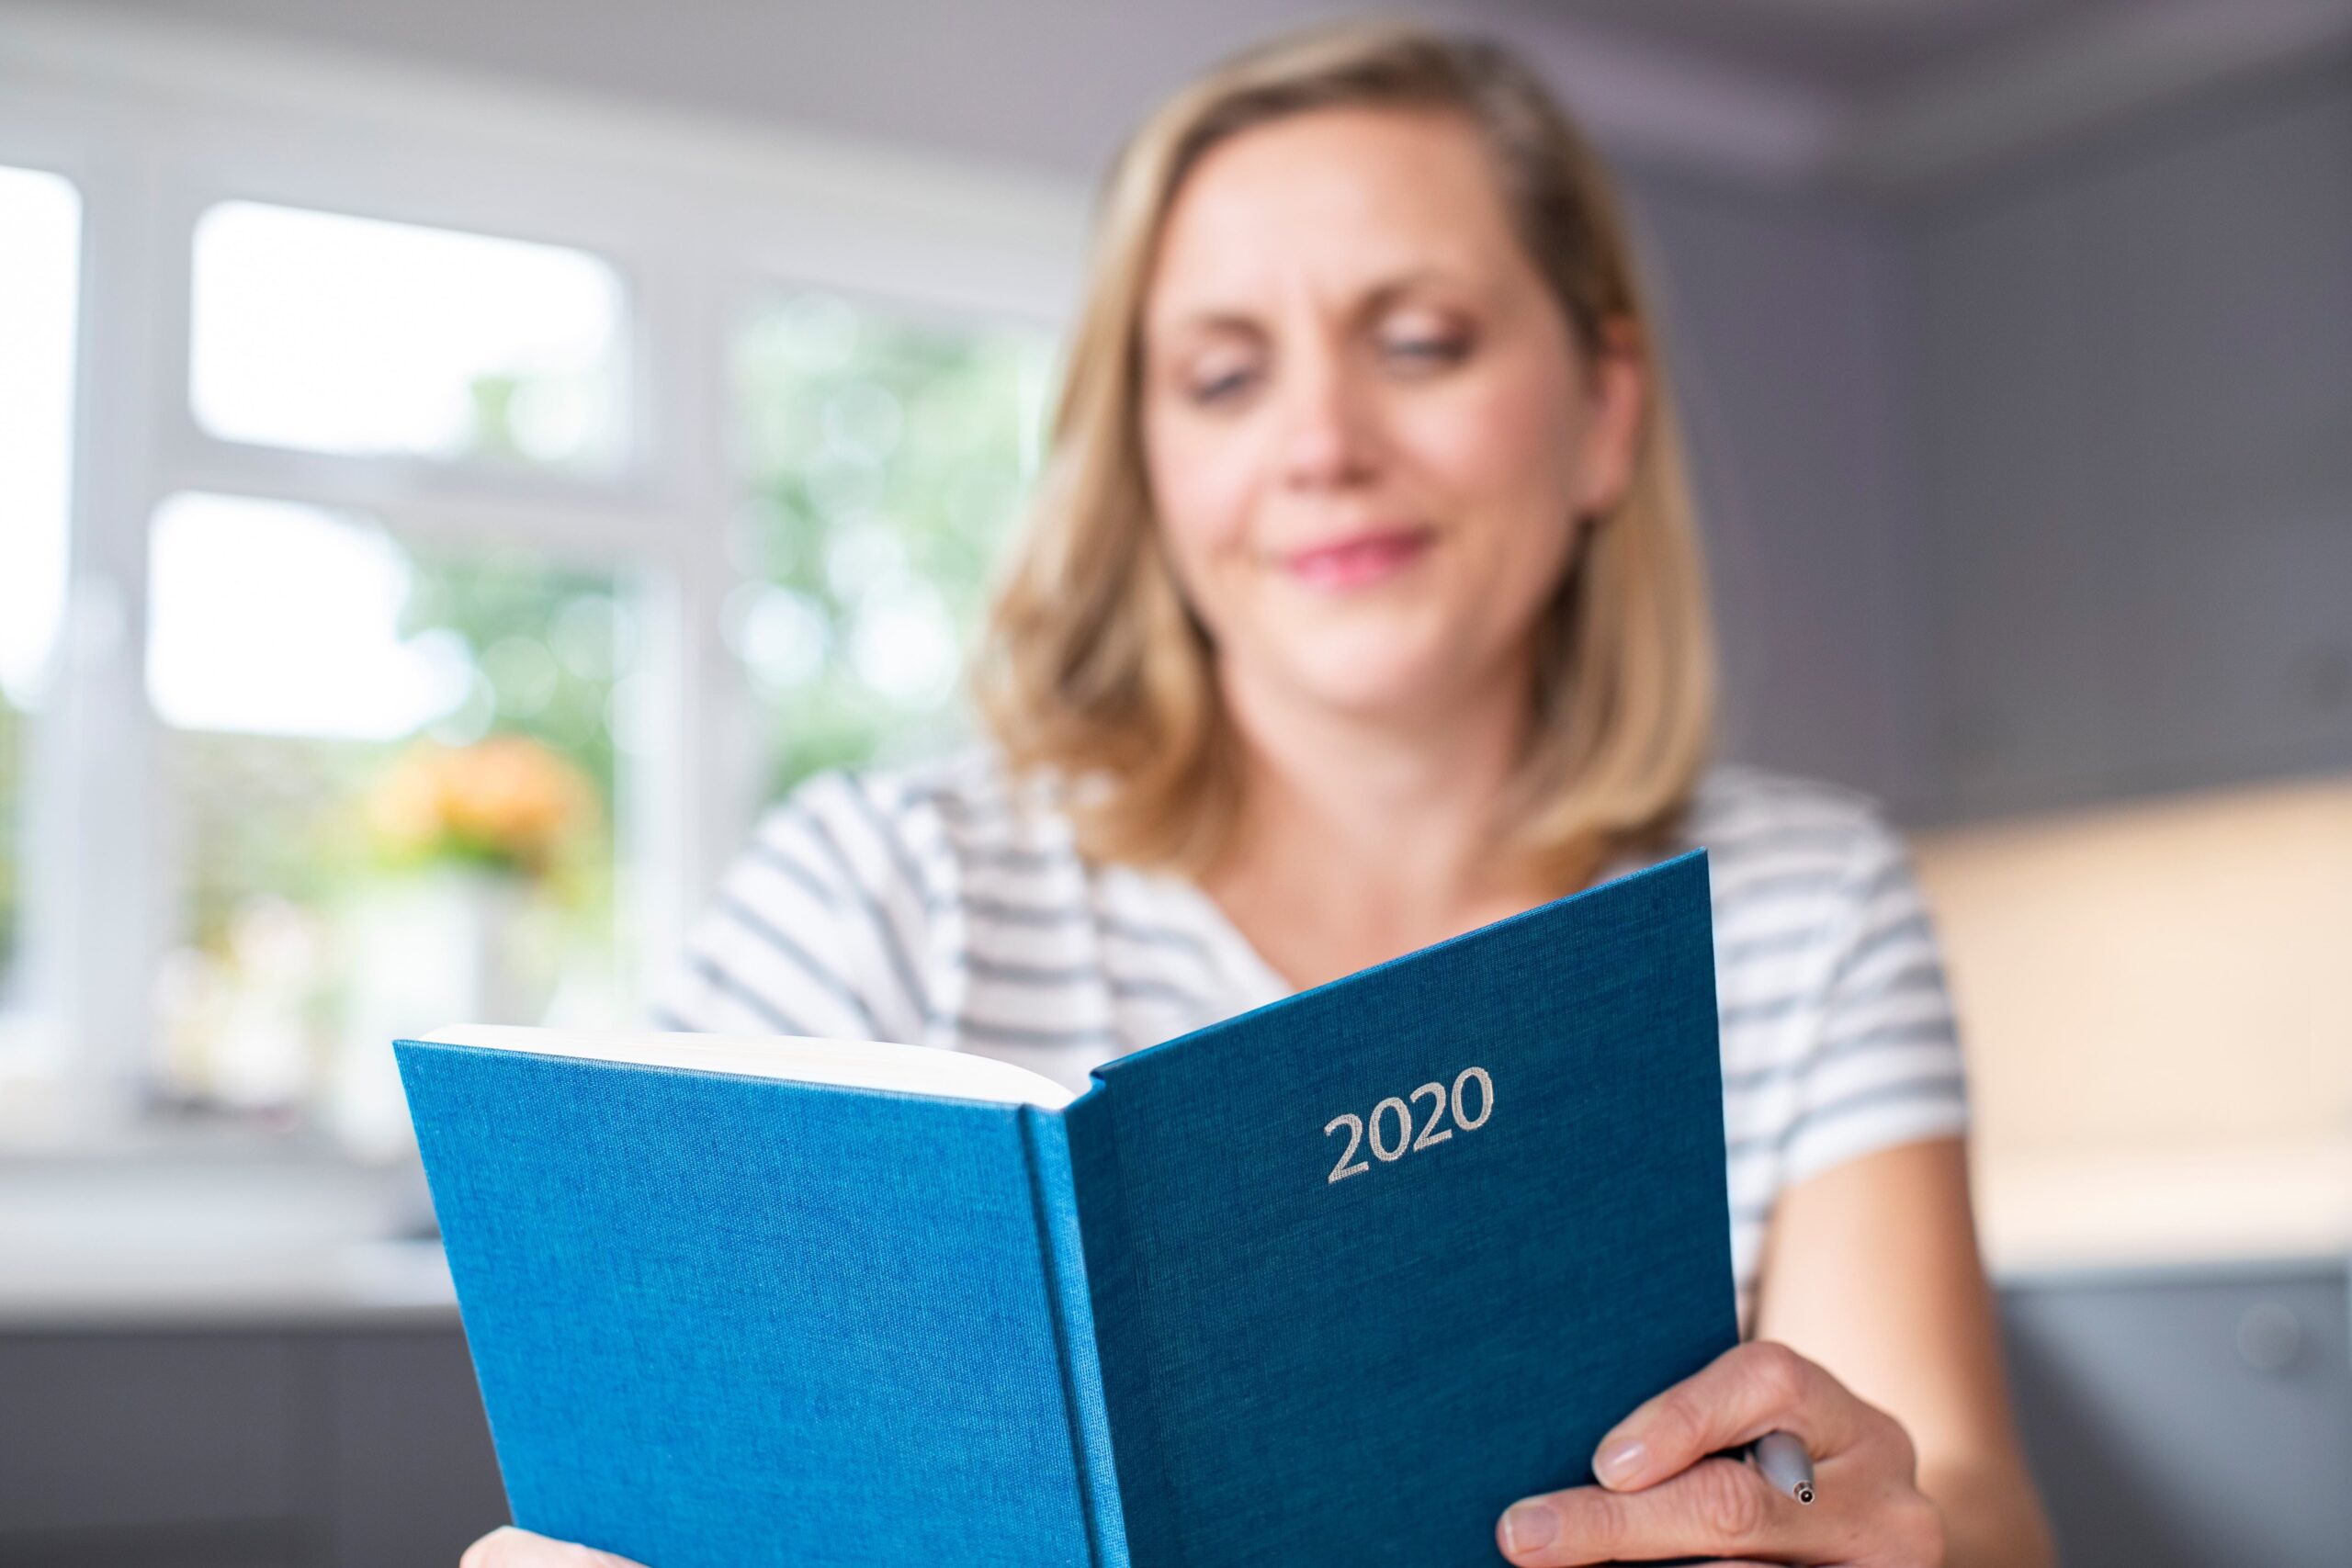 Woman reading resolutions in a bound journal with 2020 written on the cover.